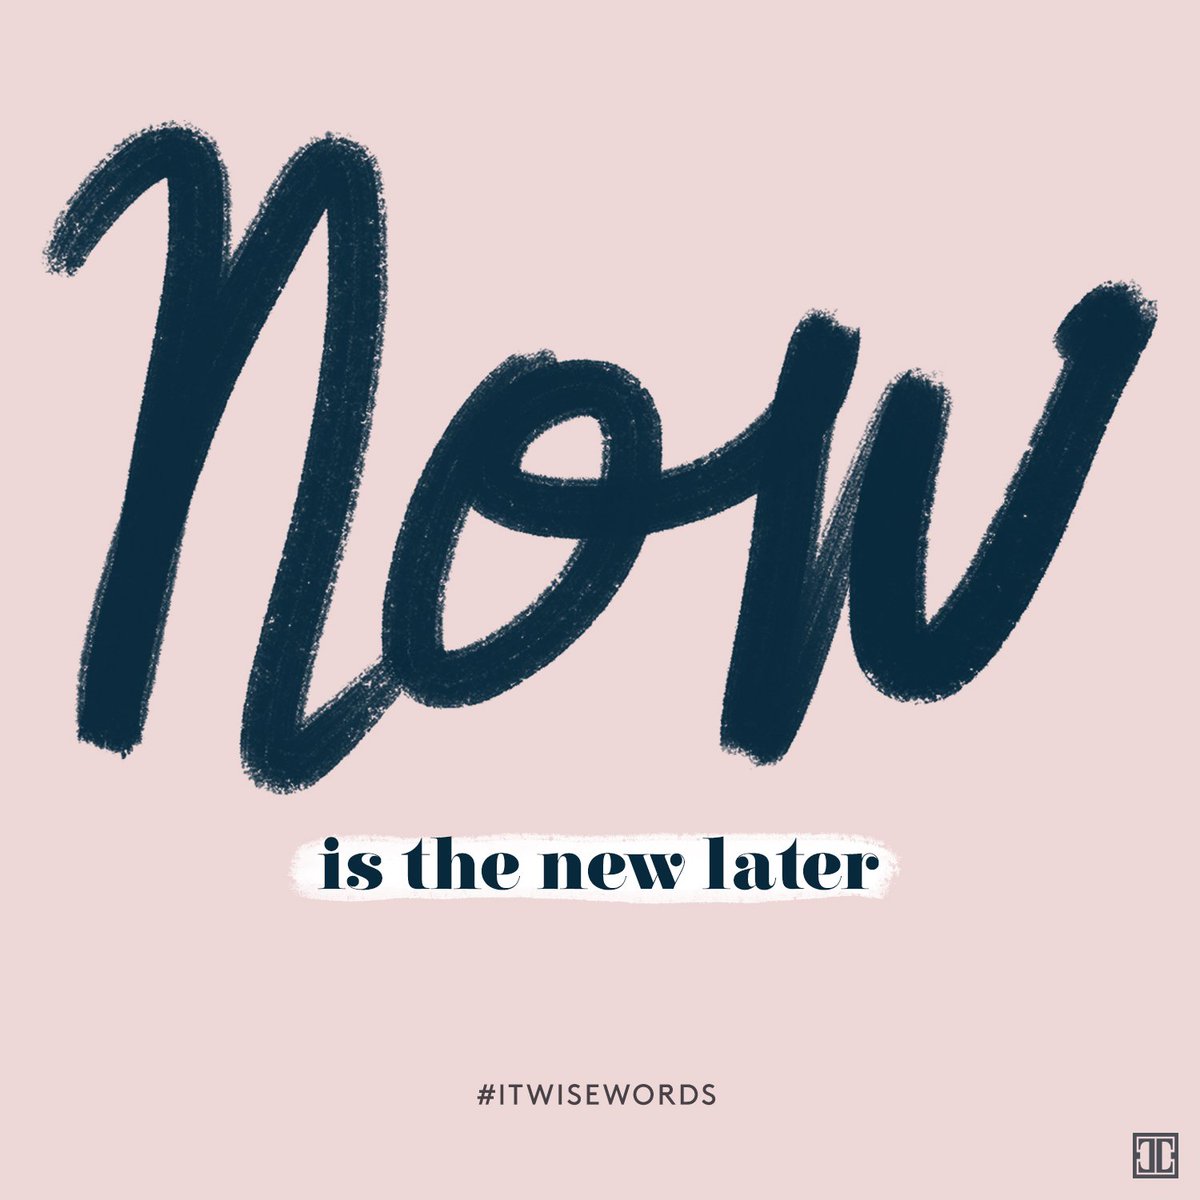 See more #ITwisewords: https://t.co/BJNUdzcN6X #wisewords #quote #inspiration https://t.co/5ANc5jPNFc